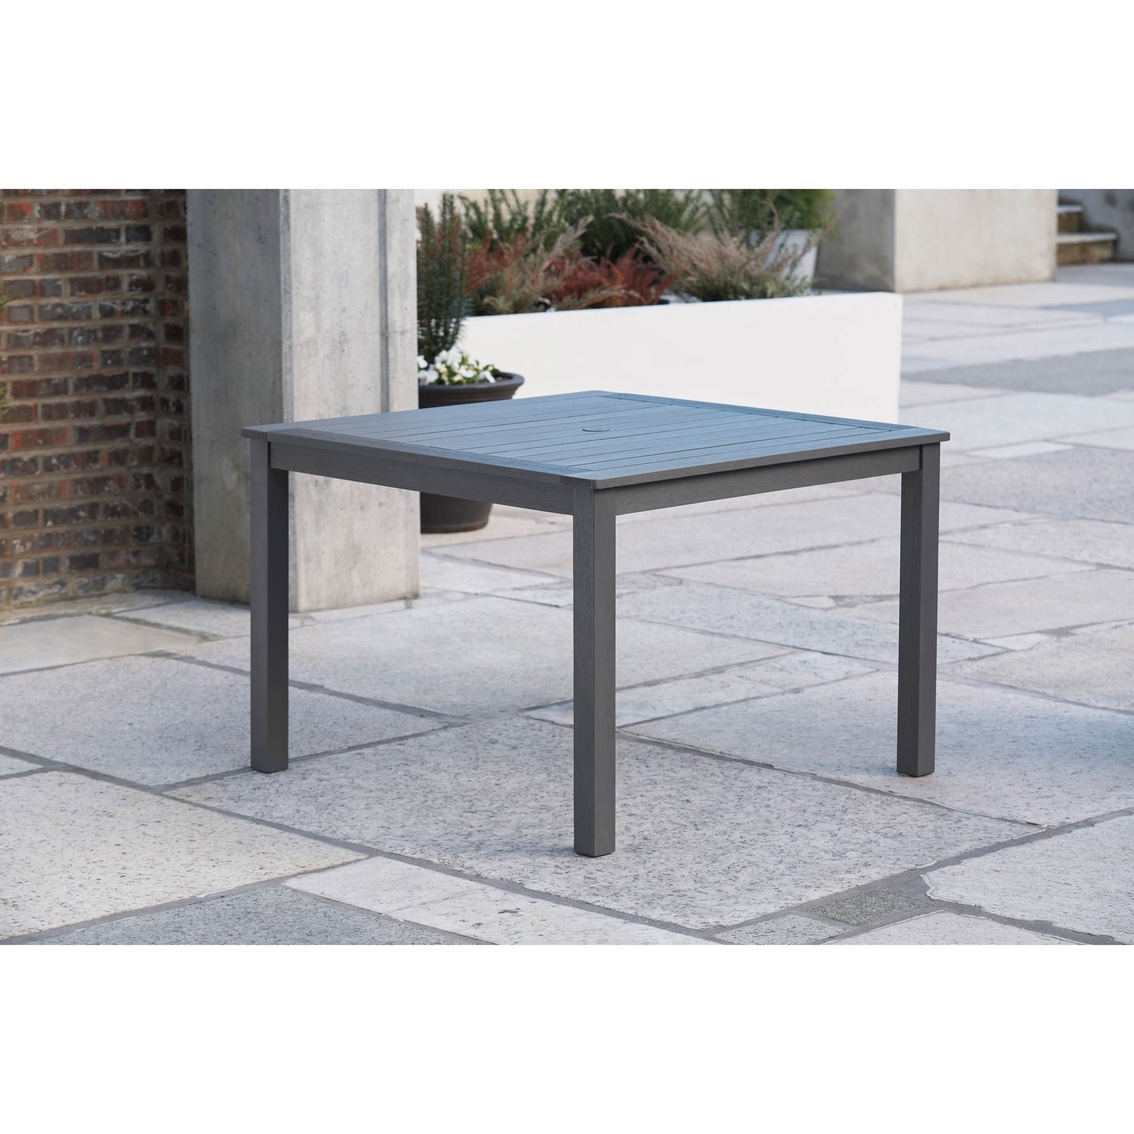 Signature Design by Ashley Eden Town Outdoor Dining Table - Image 4 of 5